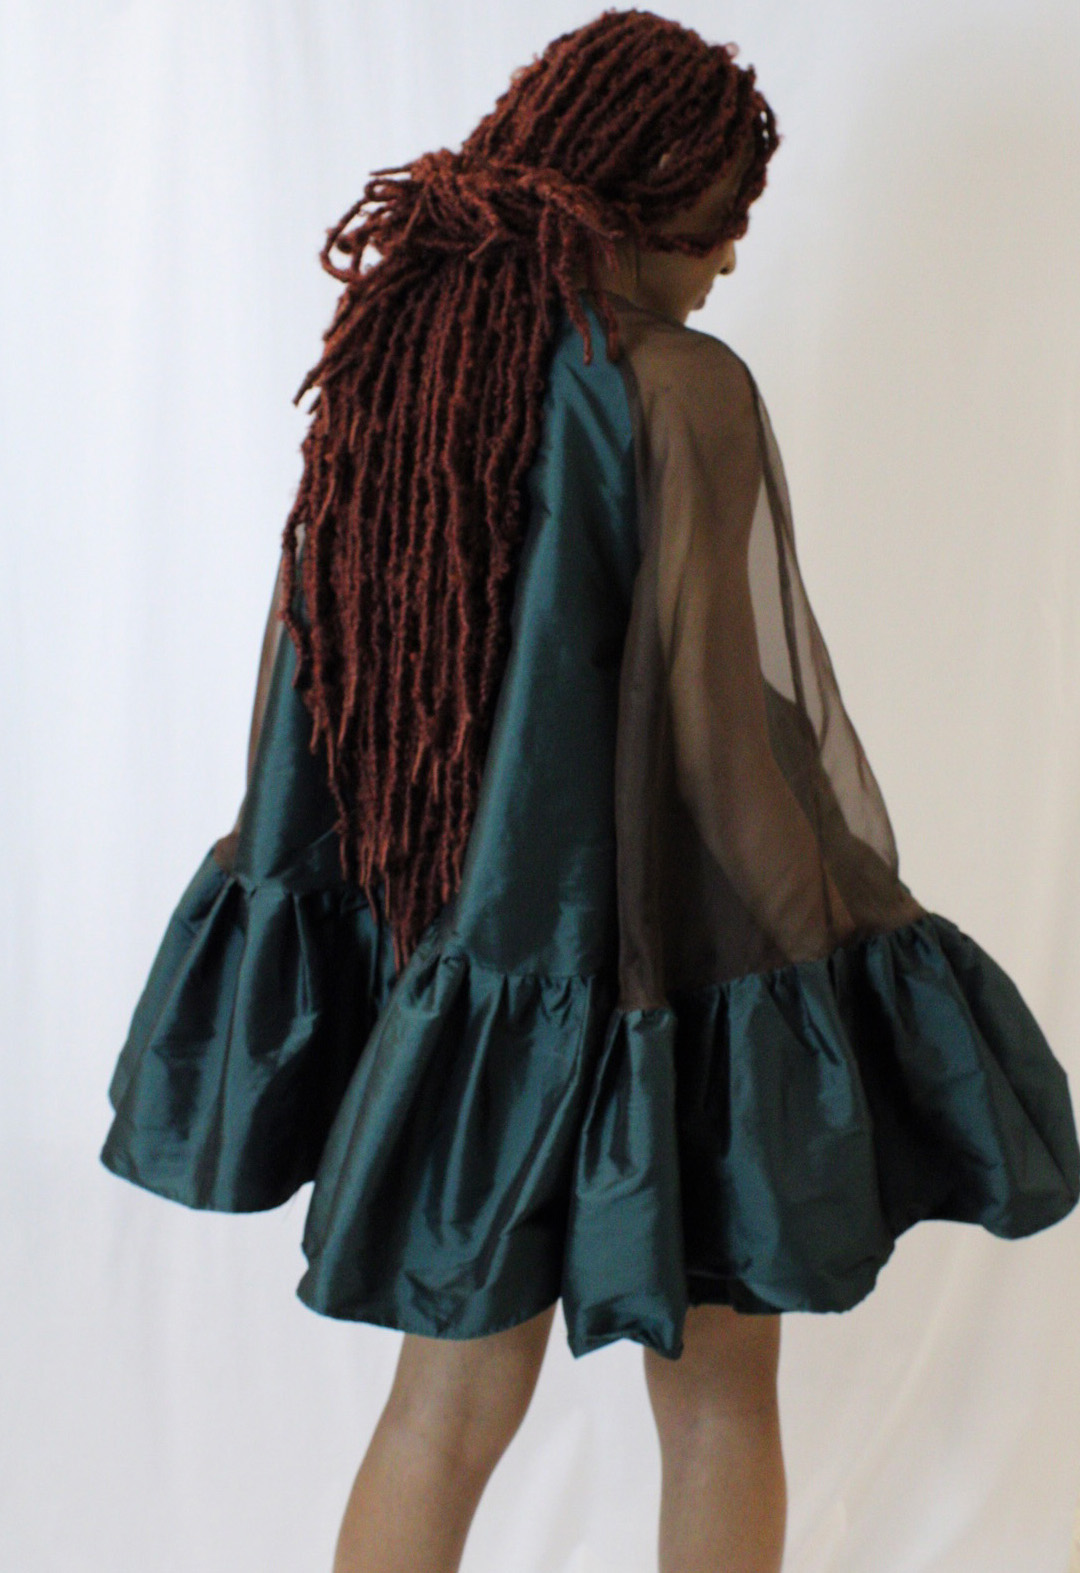 The is a back view of the tent dress showing how wide the sleeves are.